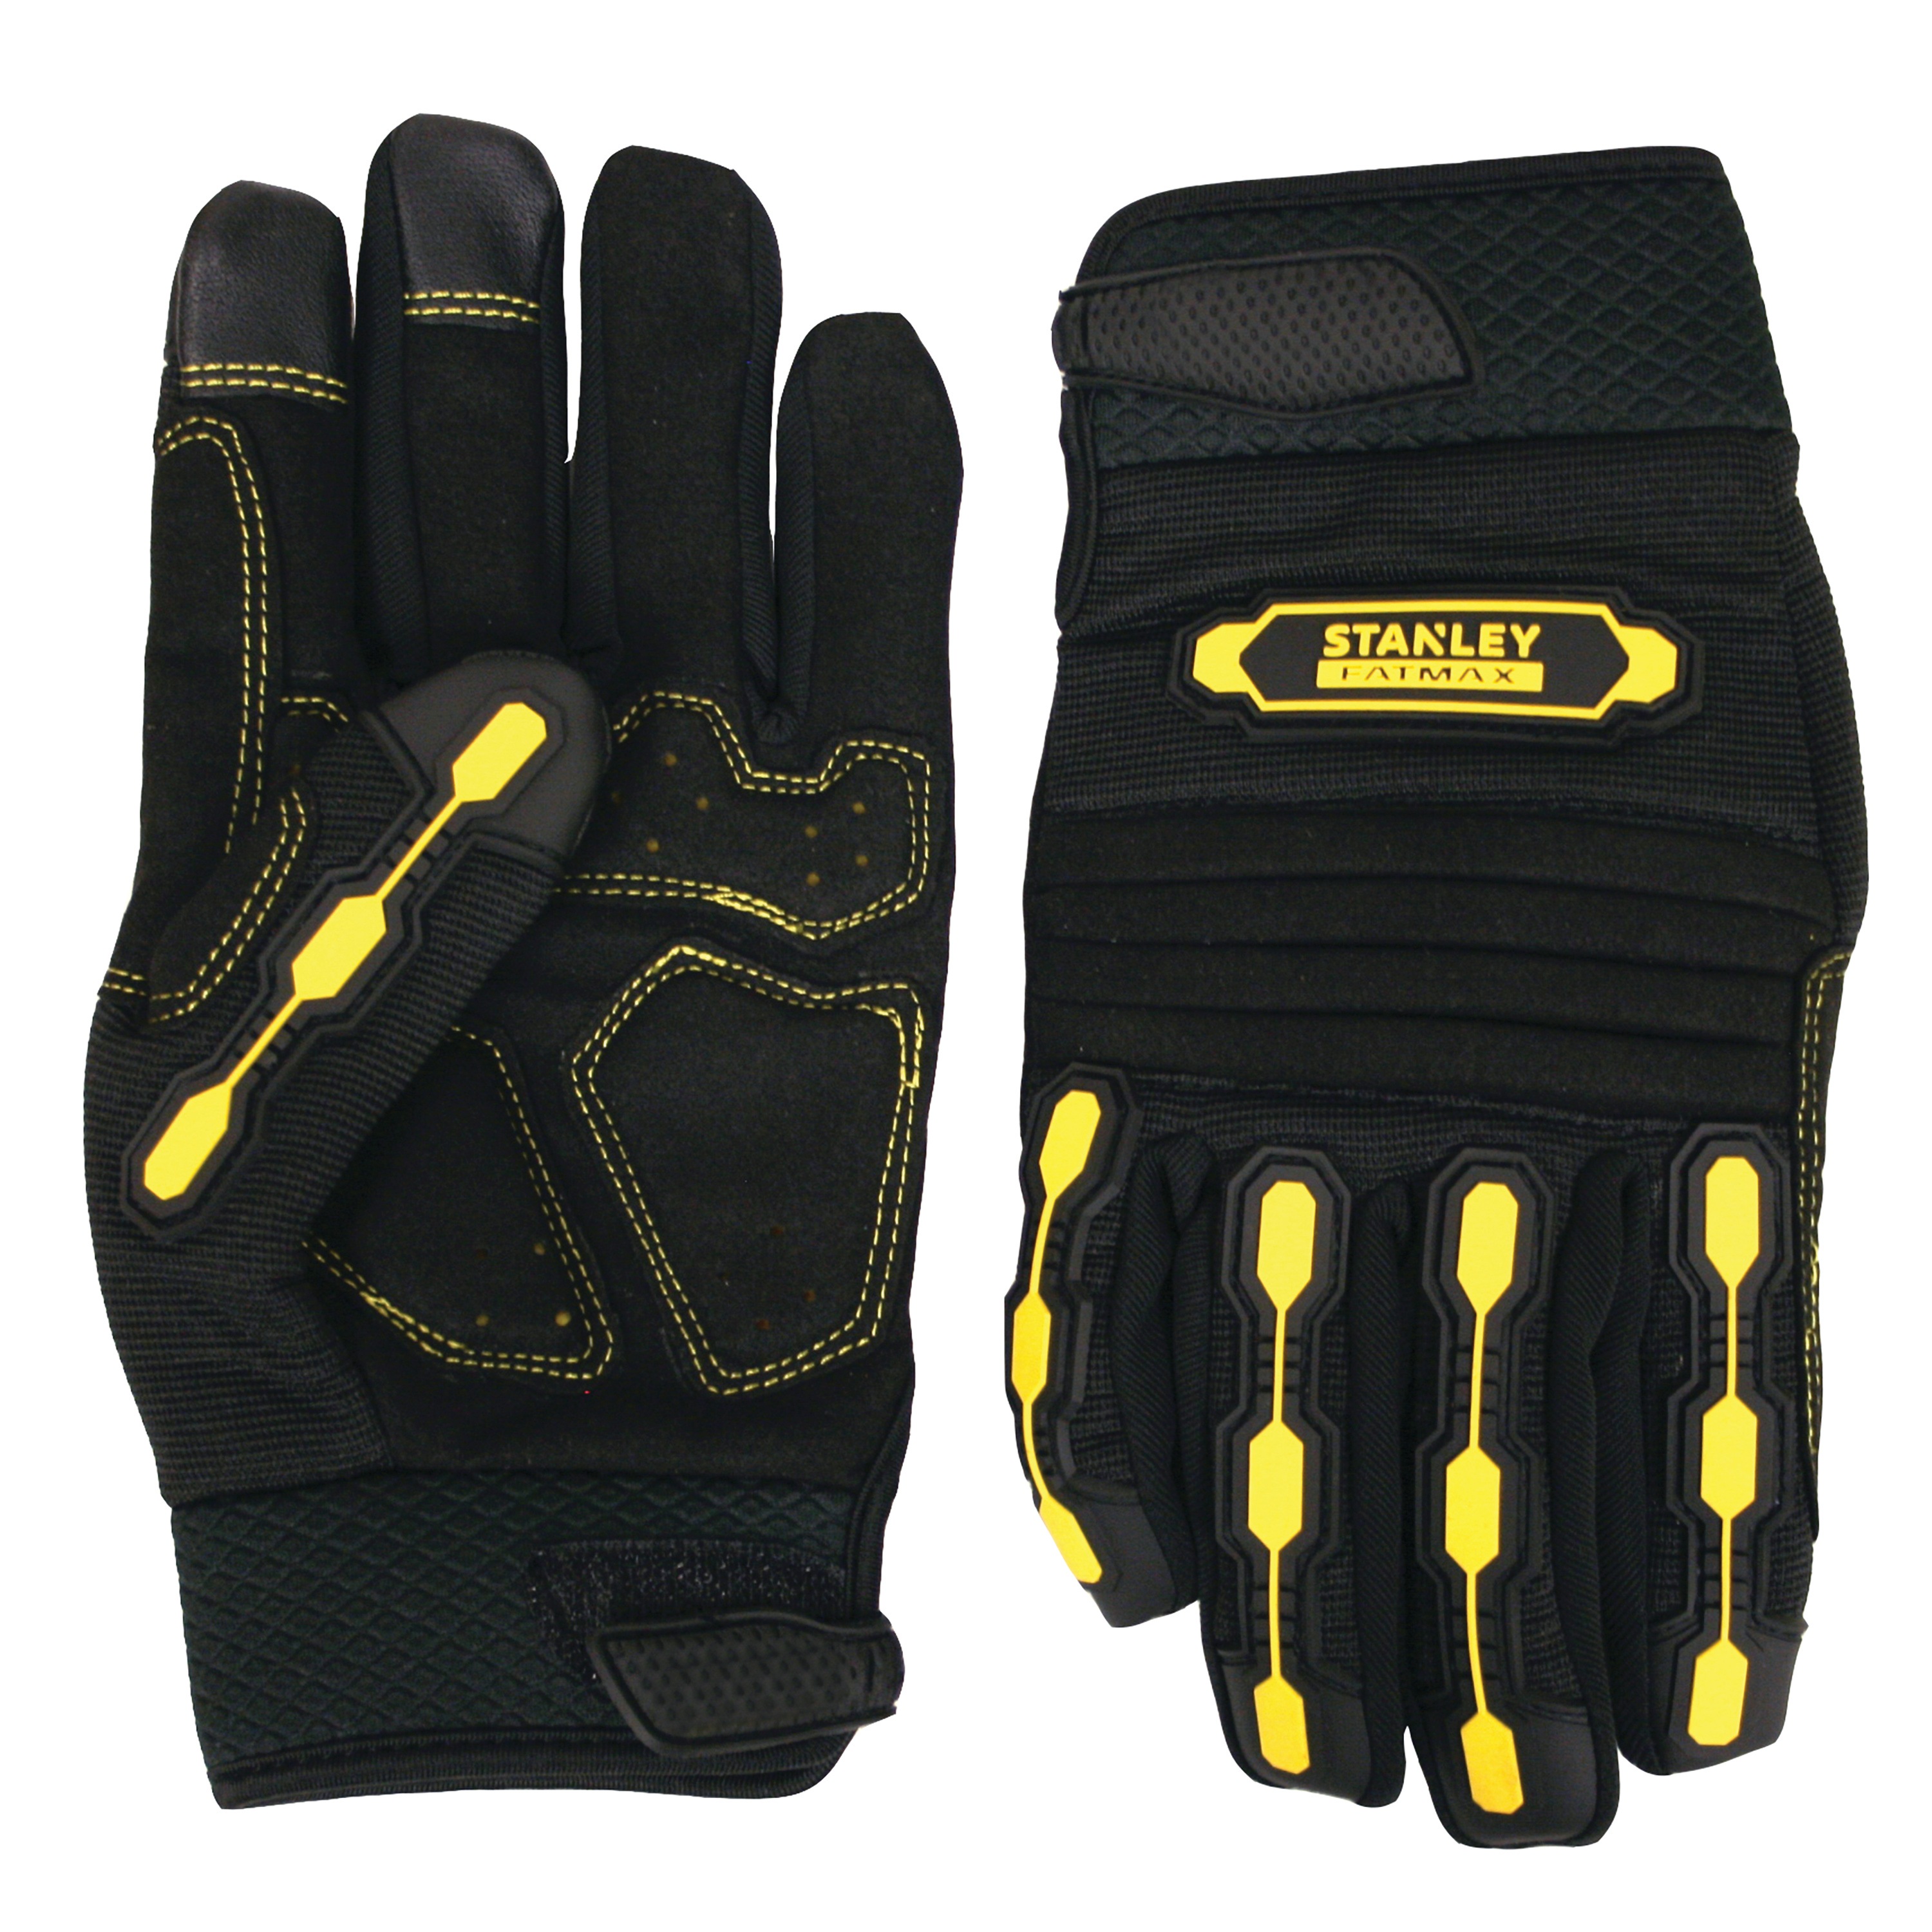 Stanley Tools - FATMAX Premium Gloves with Gel Padded Palm - S77201